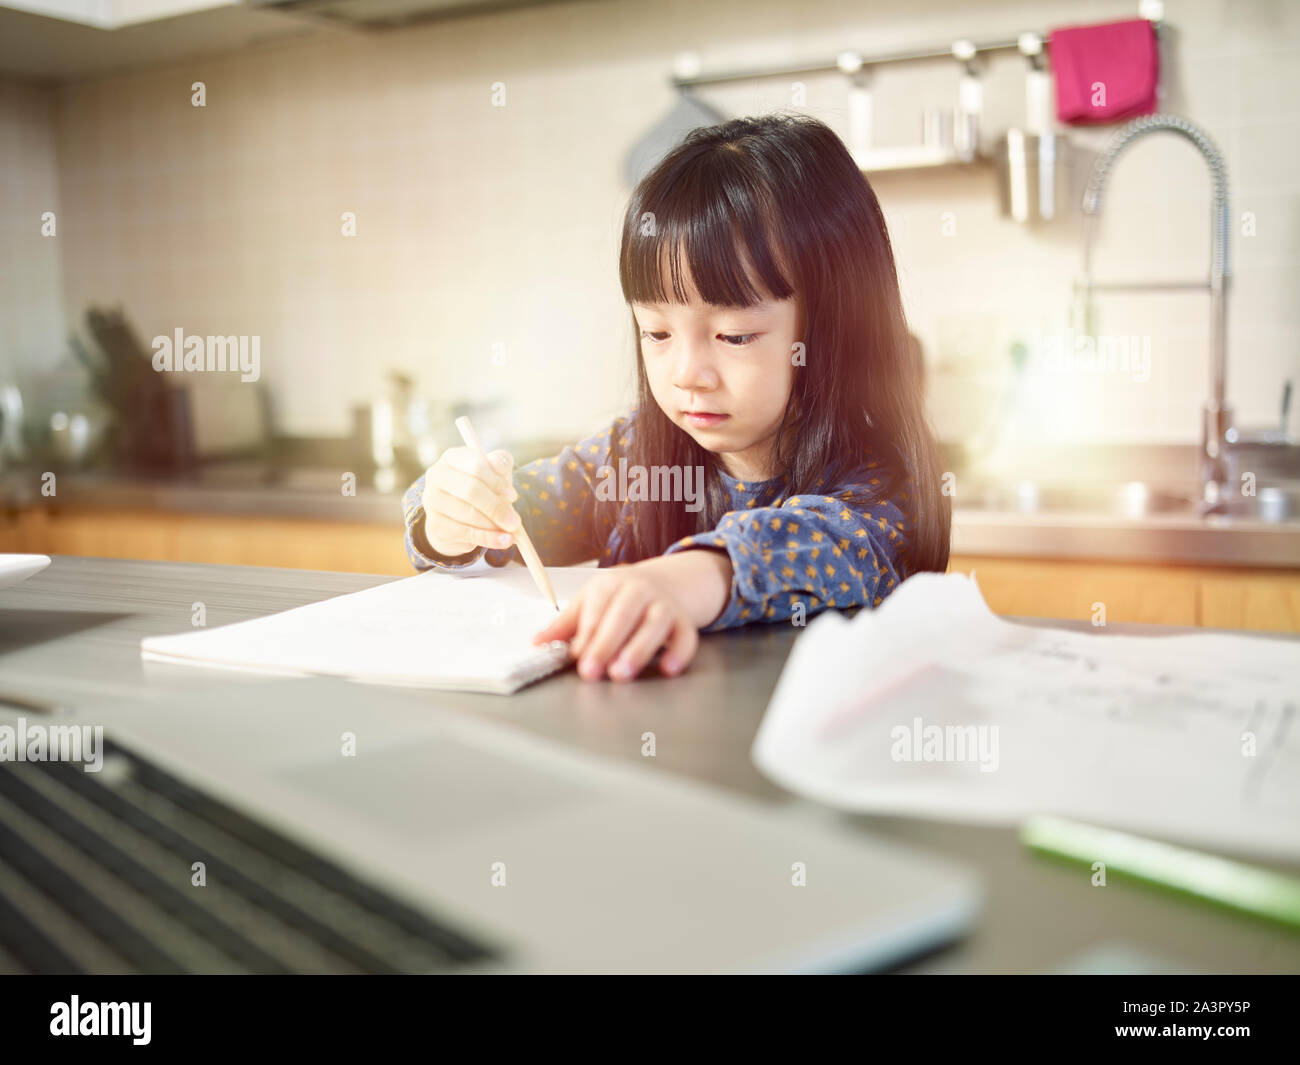 little asian girl sitting at kitchen counter at home making a drawing. Stock Photo